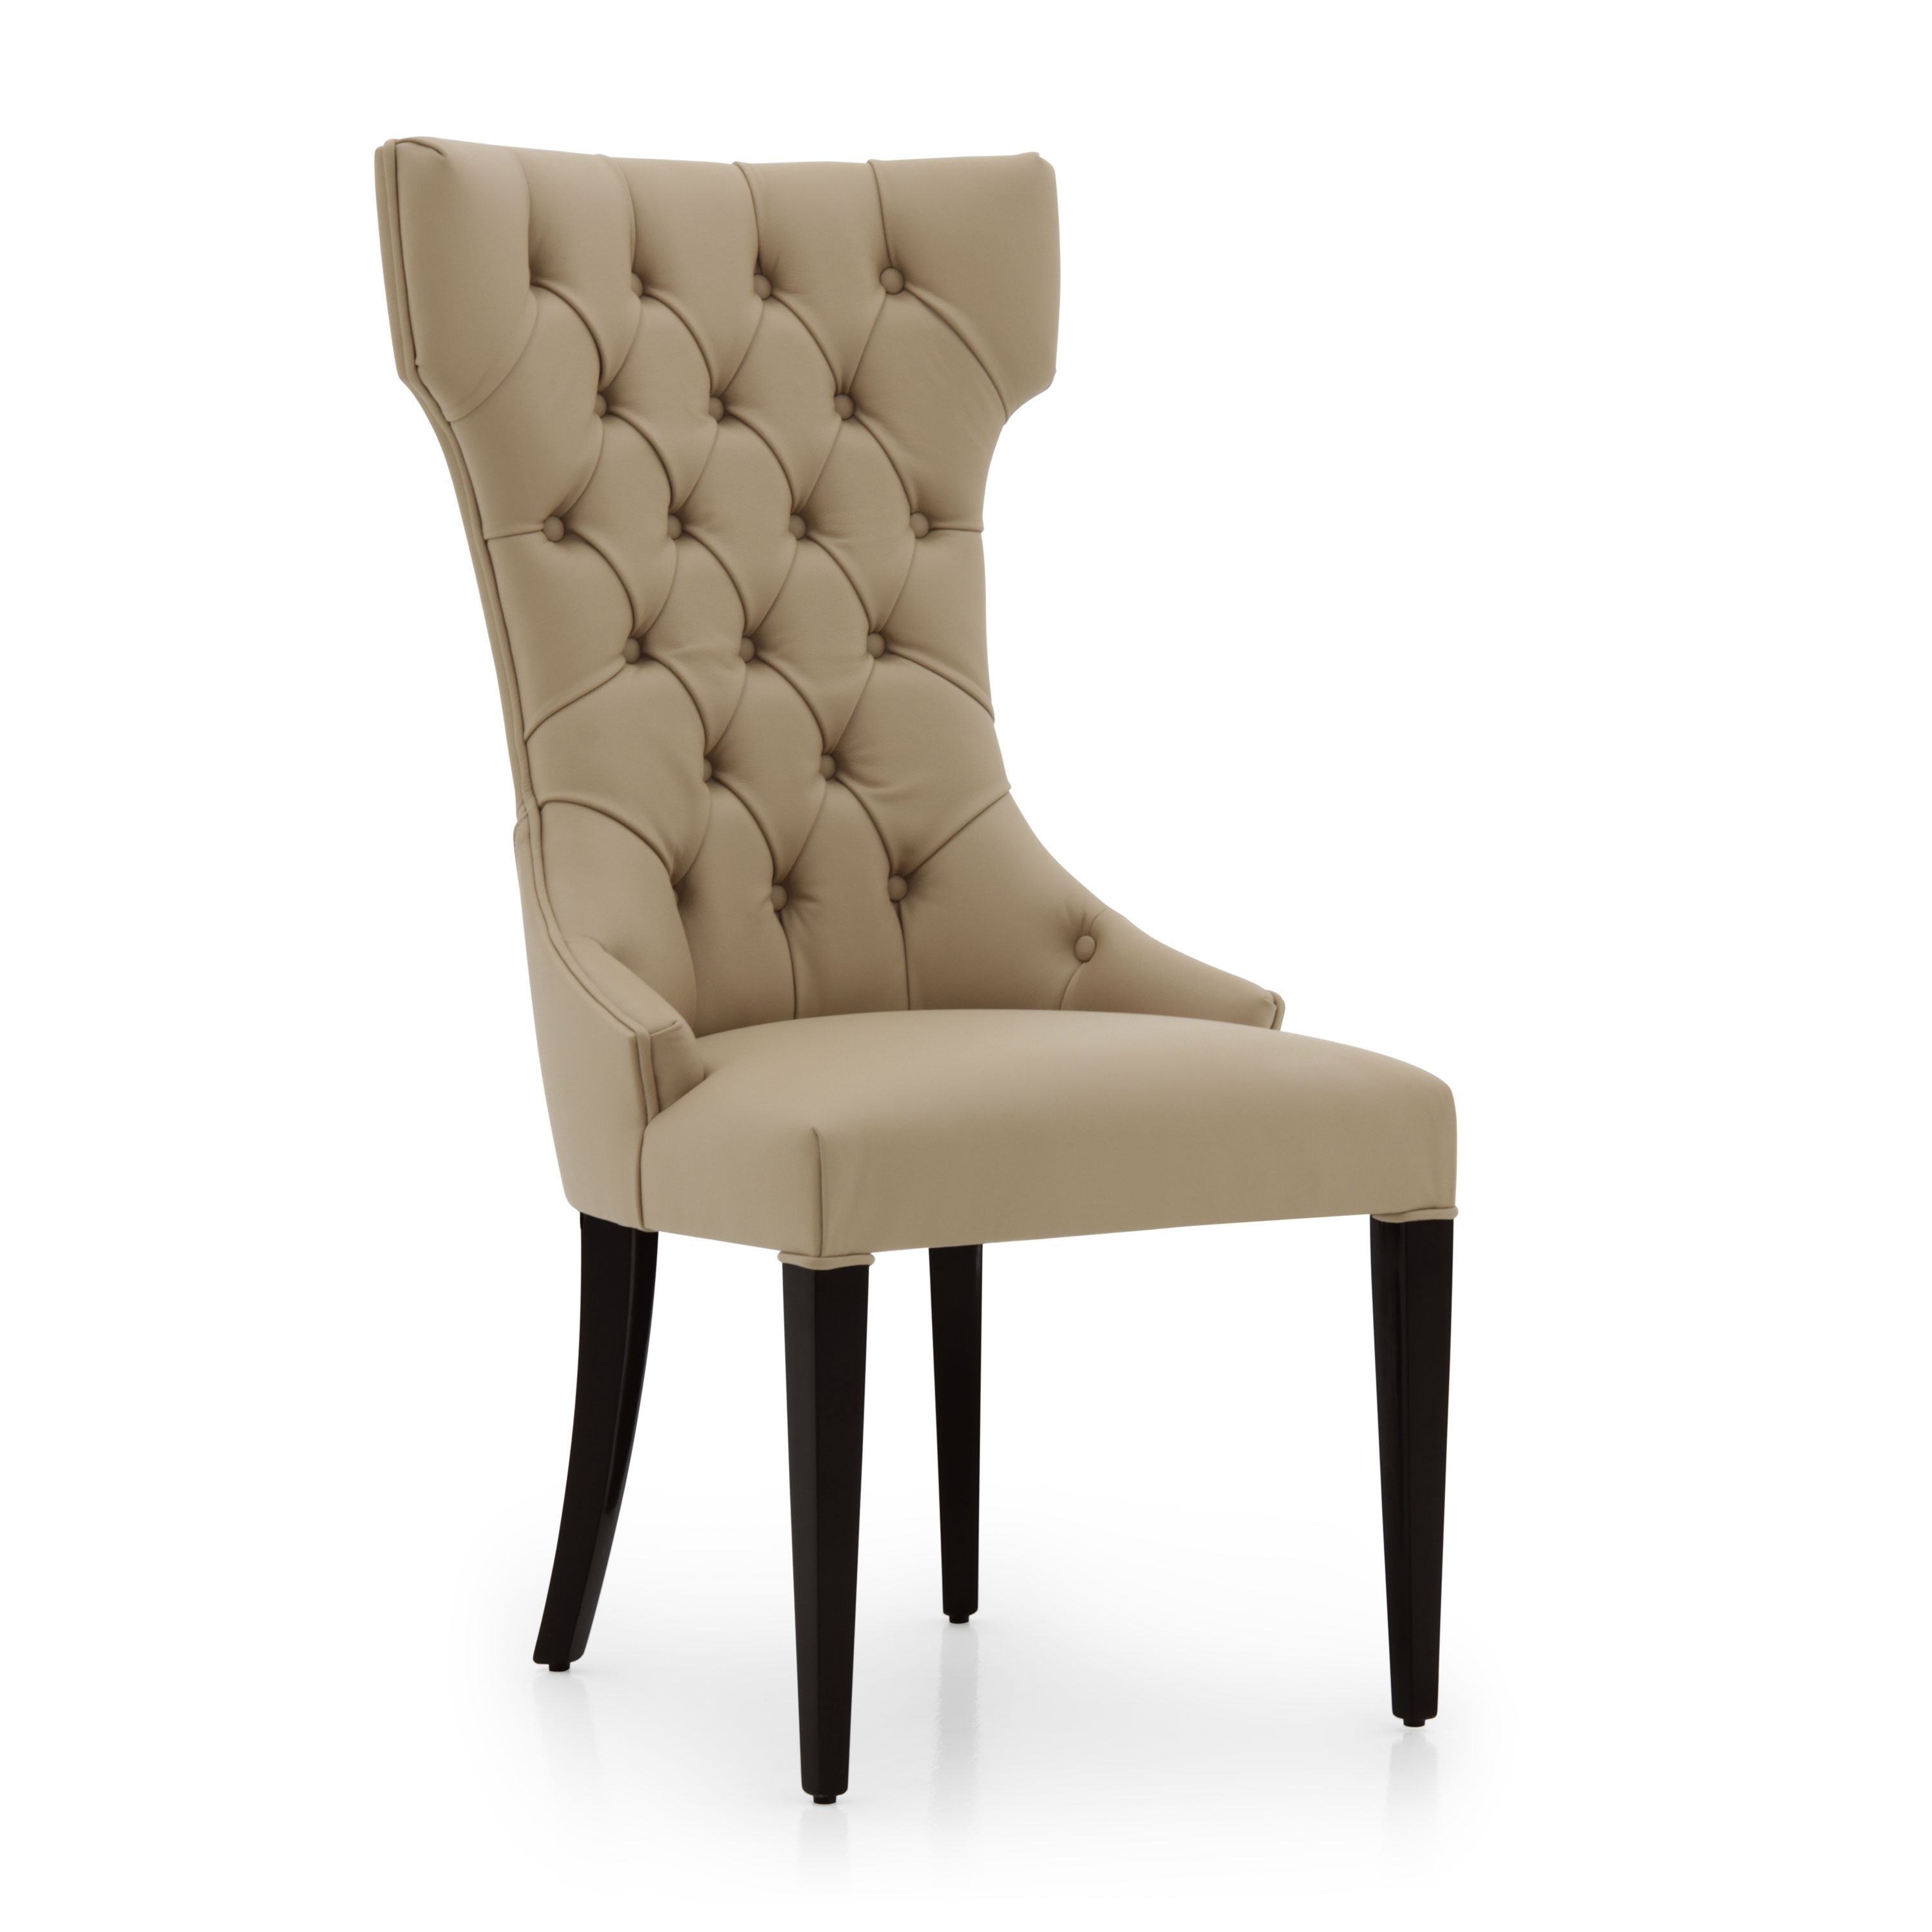 upholstered restaurant chair queen in american style